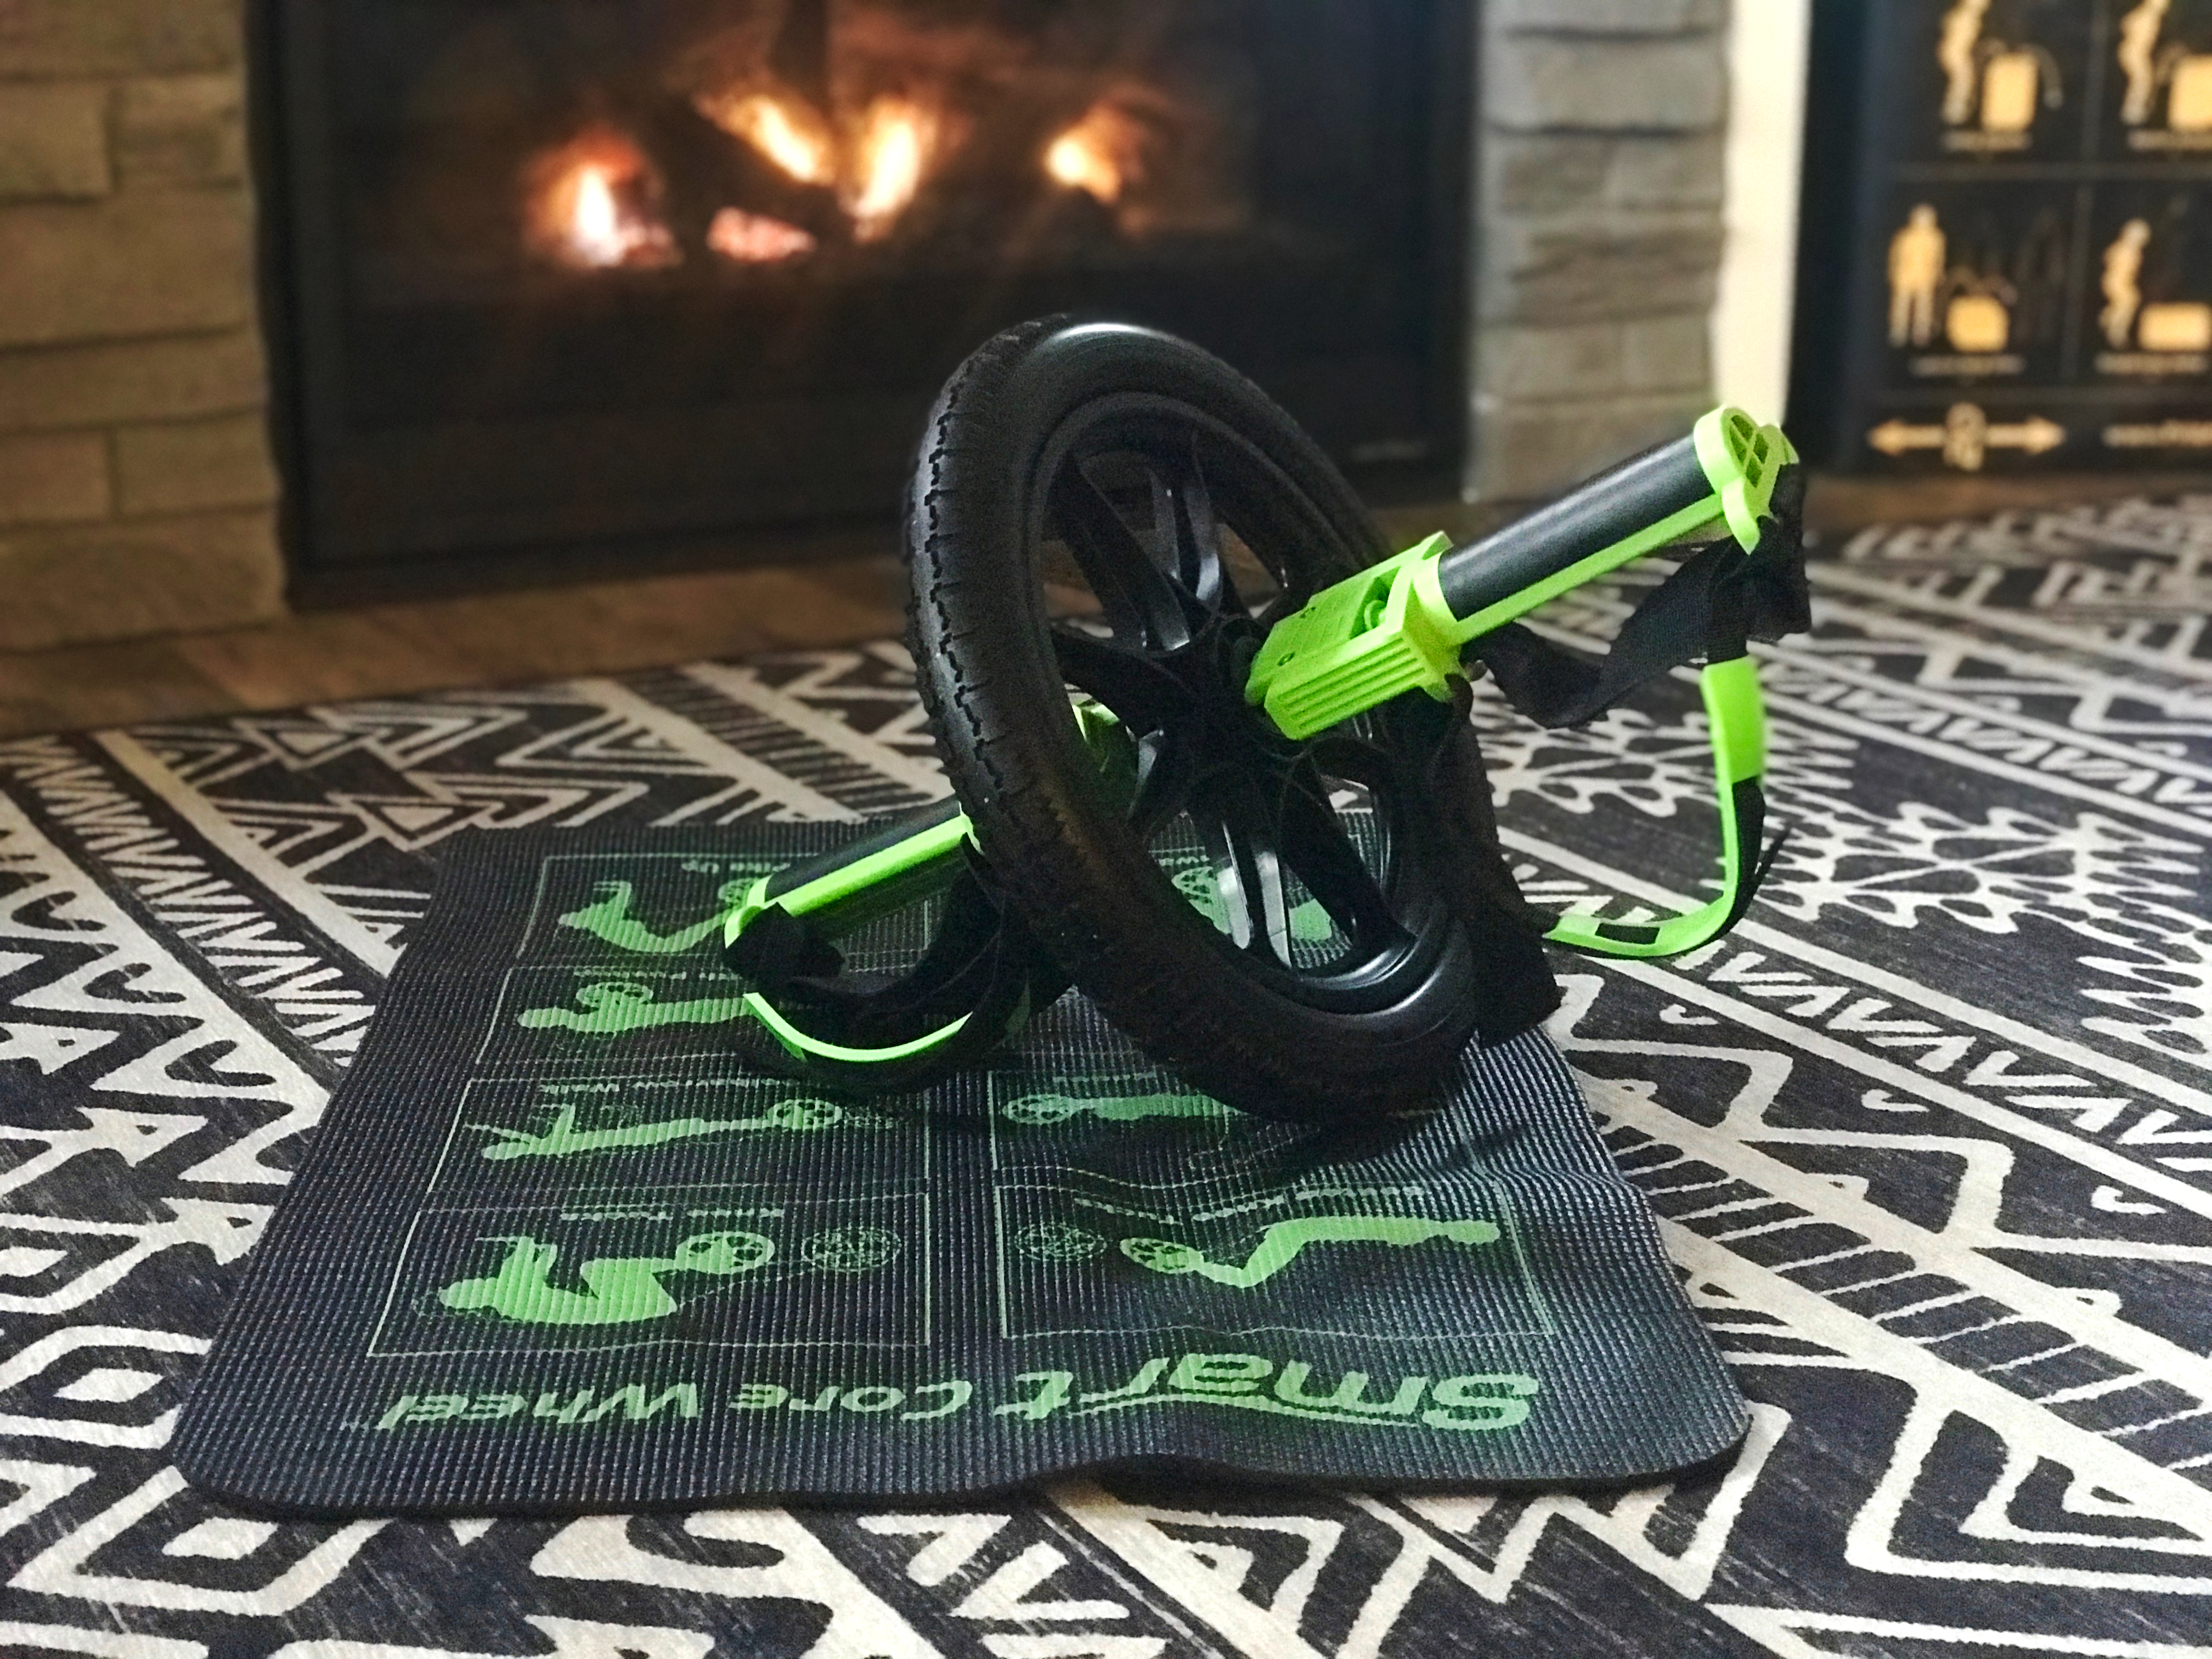 Smart Core Wheel with Mat in living room